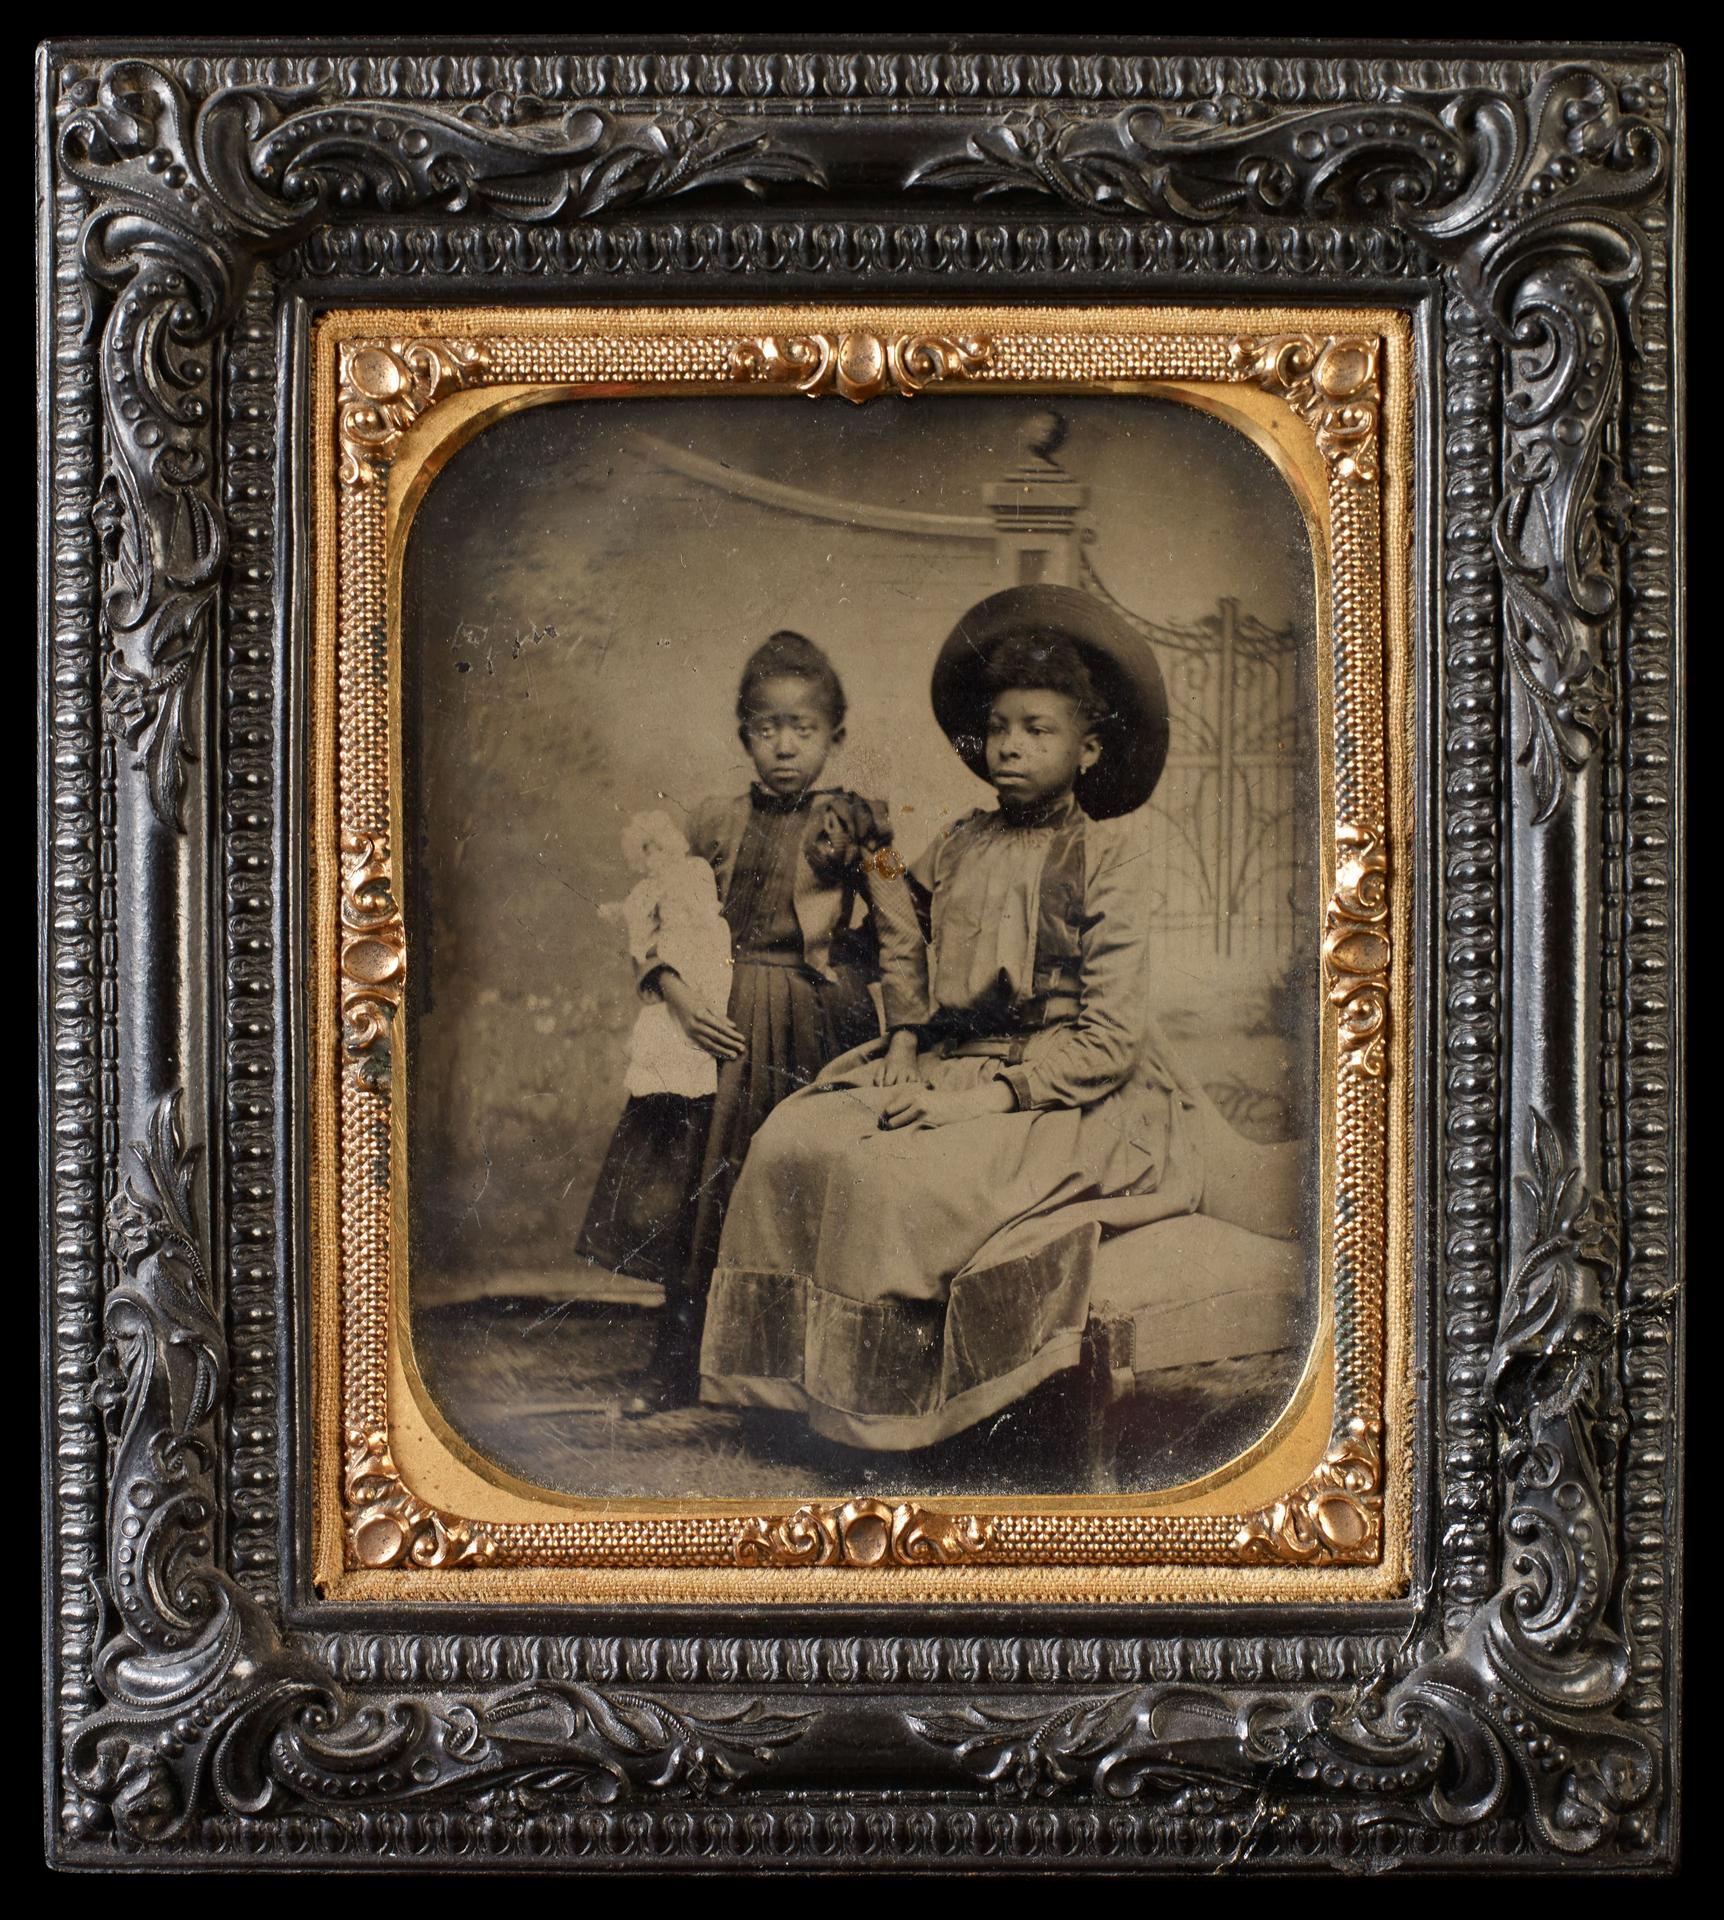 Unidentified photographer, Tintype in frame, US, ca. 1860–80